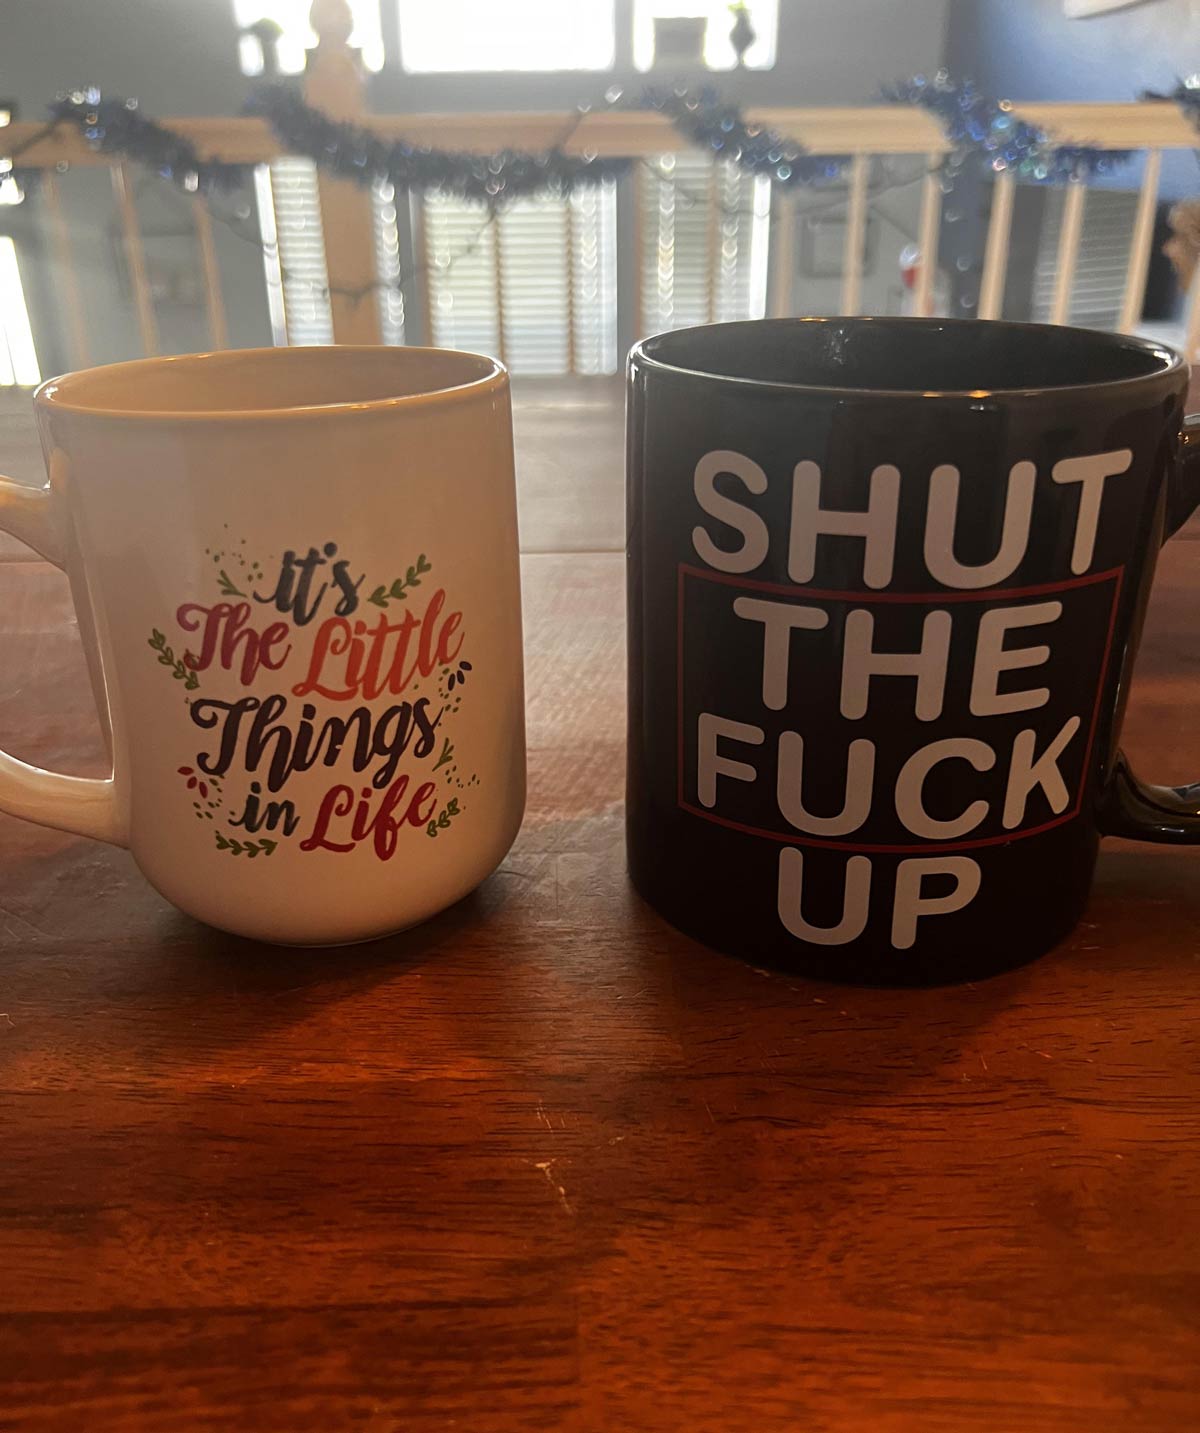 My wife’s coffee on the left, mine on the right